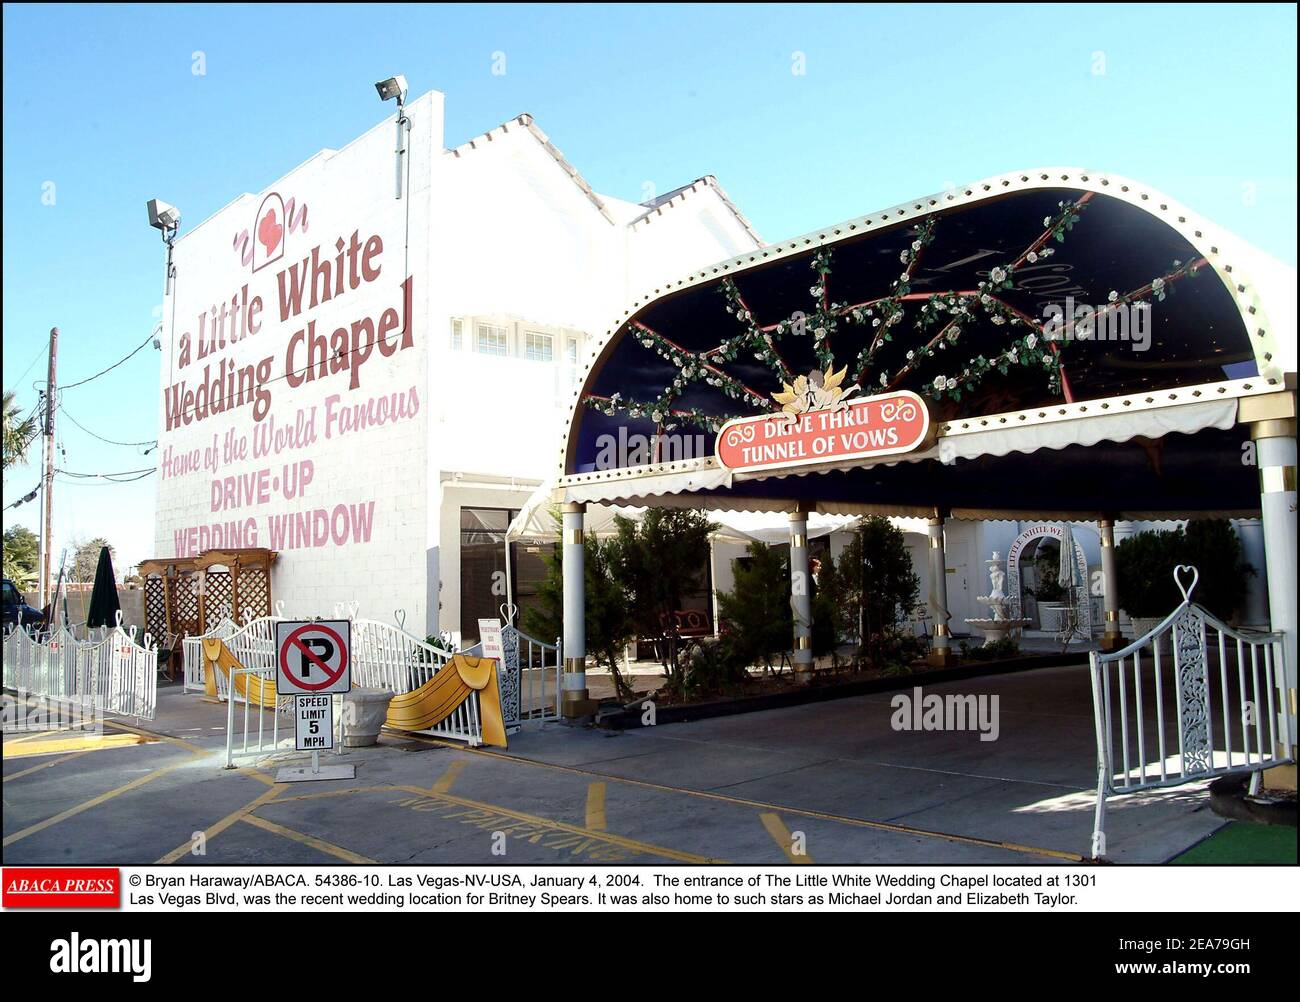 © Bryan Haraway/ABACA. 54386-10. Las Vegas-NV-USA, January 4, 2004. The entrance of The Little White Wedding Chapel located at 1301 Las Vegas Blvd, was the recent wedding location for Britney Spears. It was also home to such stars as Michael Jordan and Elizabeth Taylor. Stock Photo